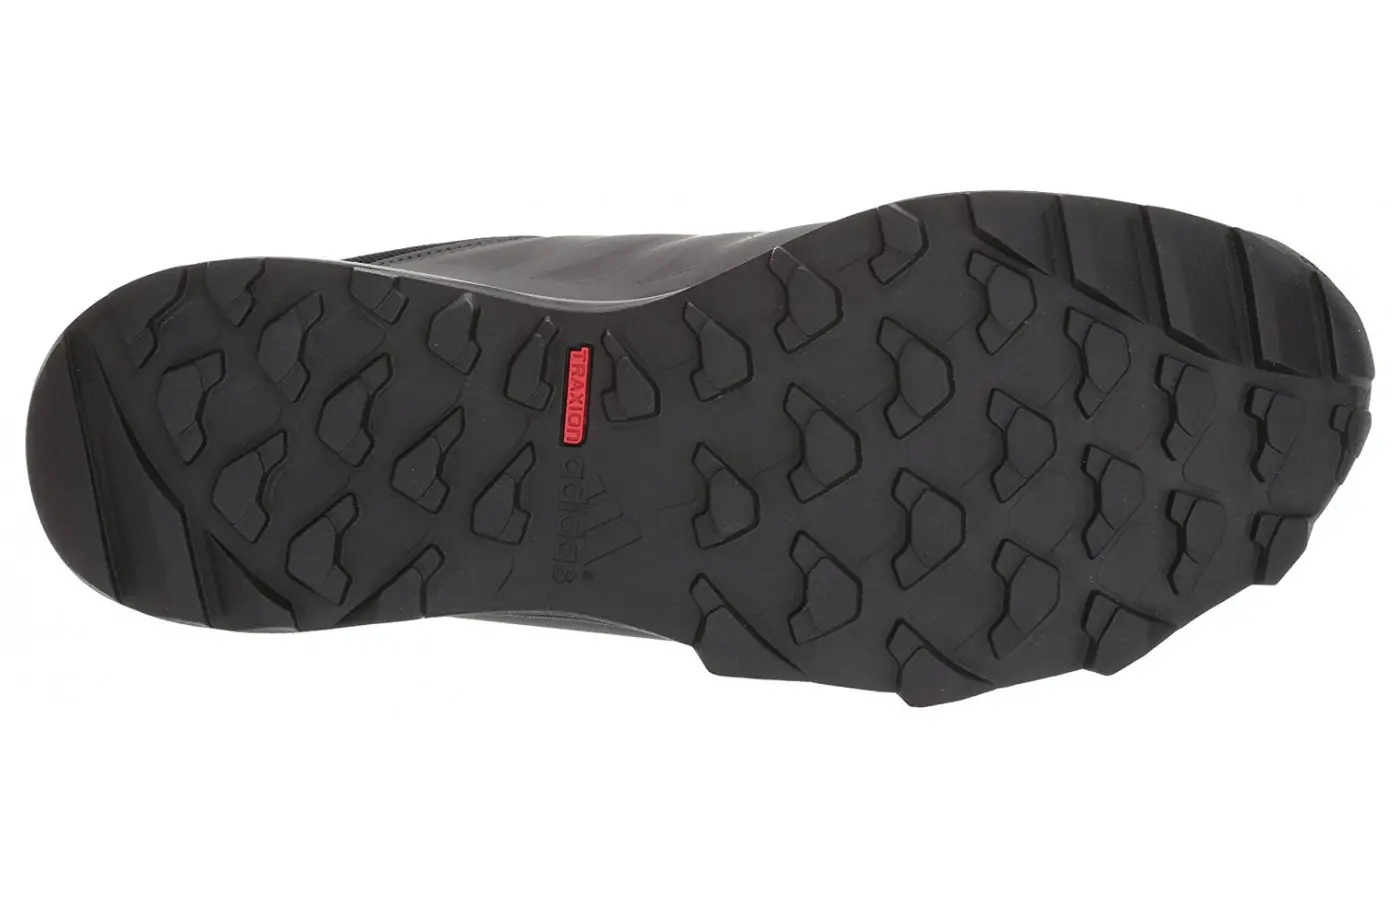 TRAXION rubber is extra sticky and grippy.